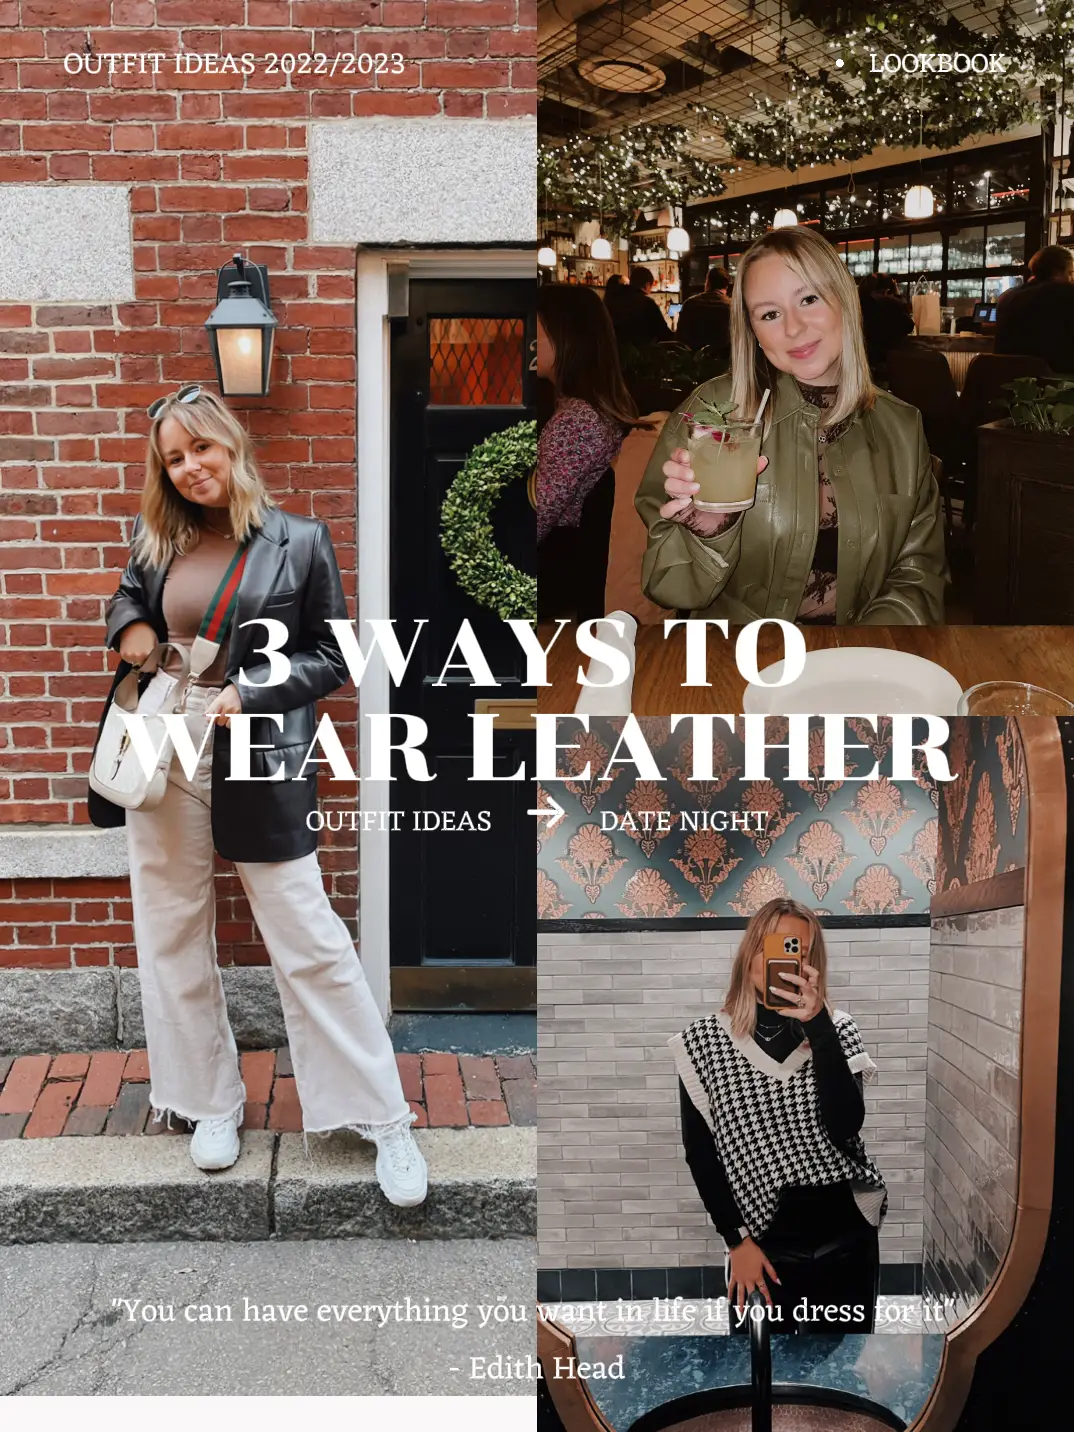 3 WAYS TO WEAR A LEATHER DRESS - OUTFIT IDEAS